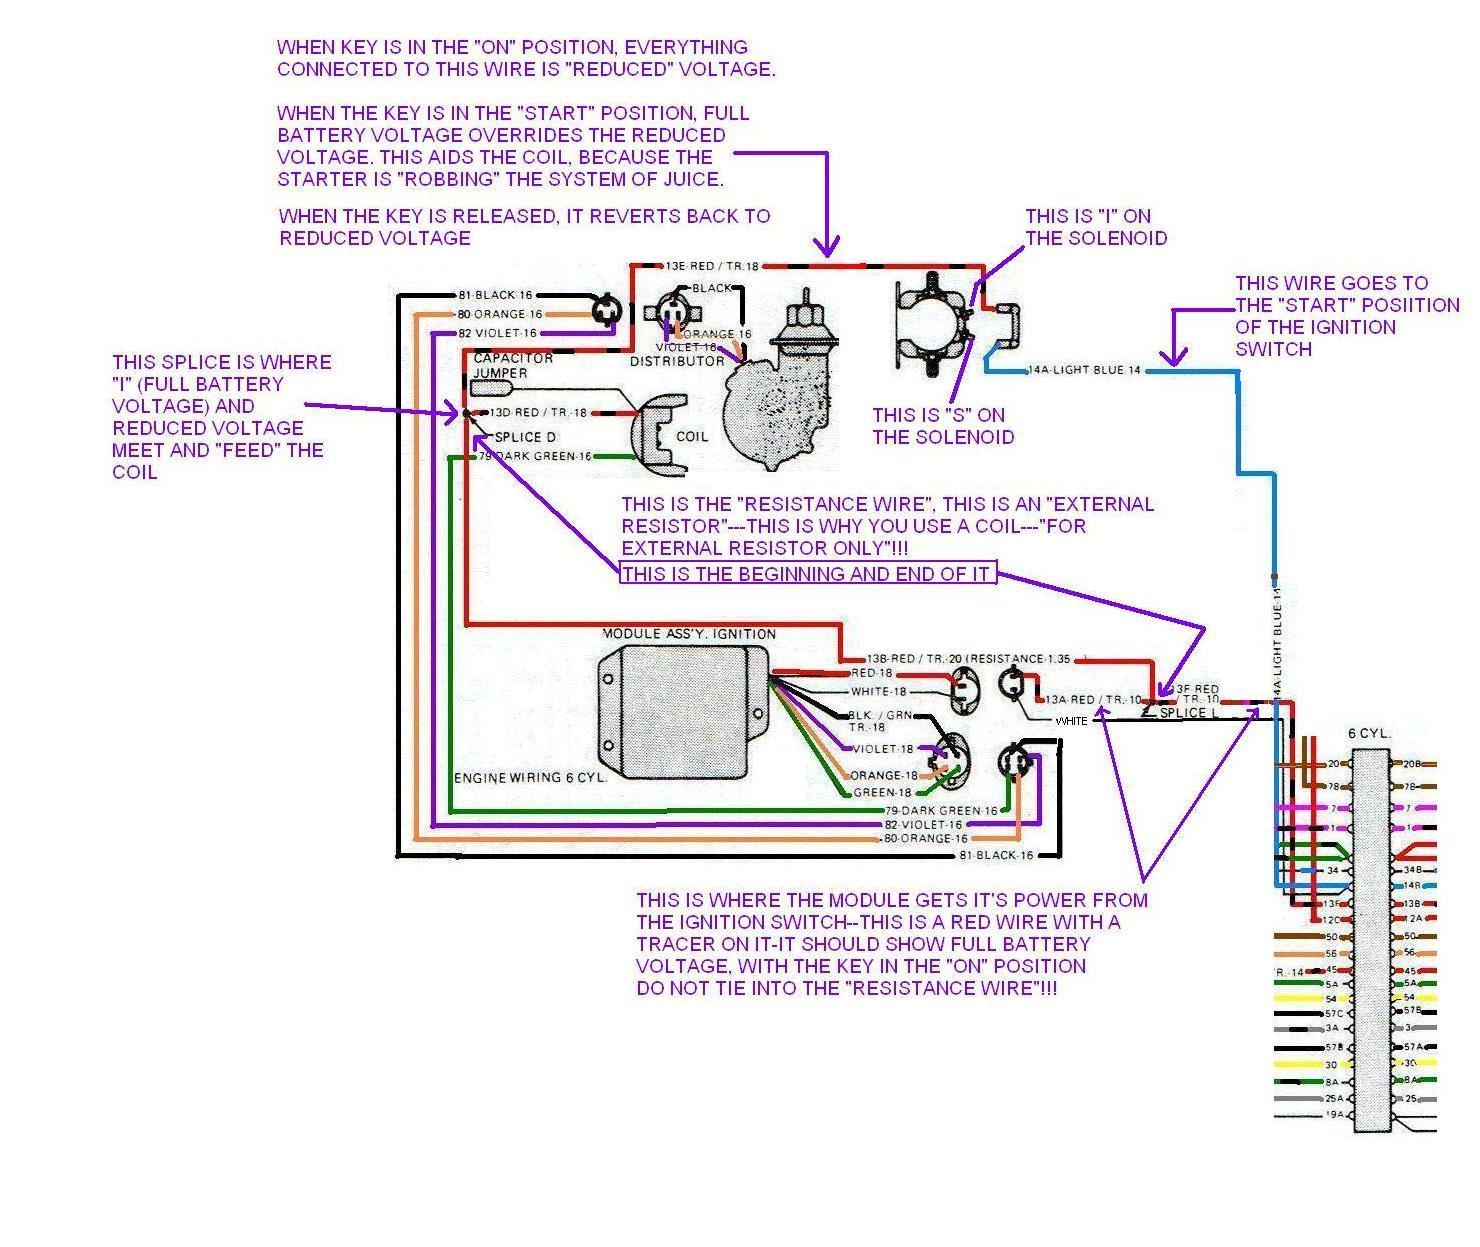 Engine Wiring: I Need a Good Copy of the Wiring for a 1979 CJ5 ...